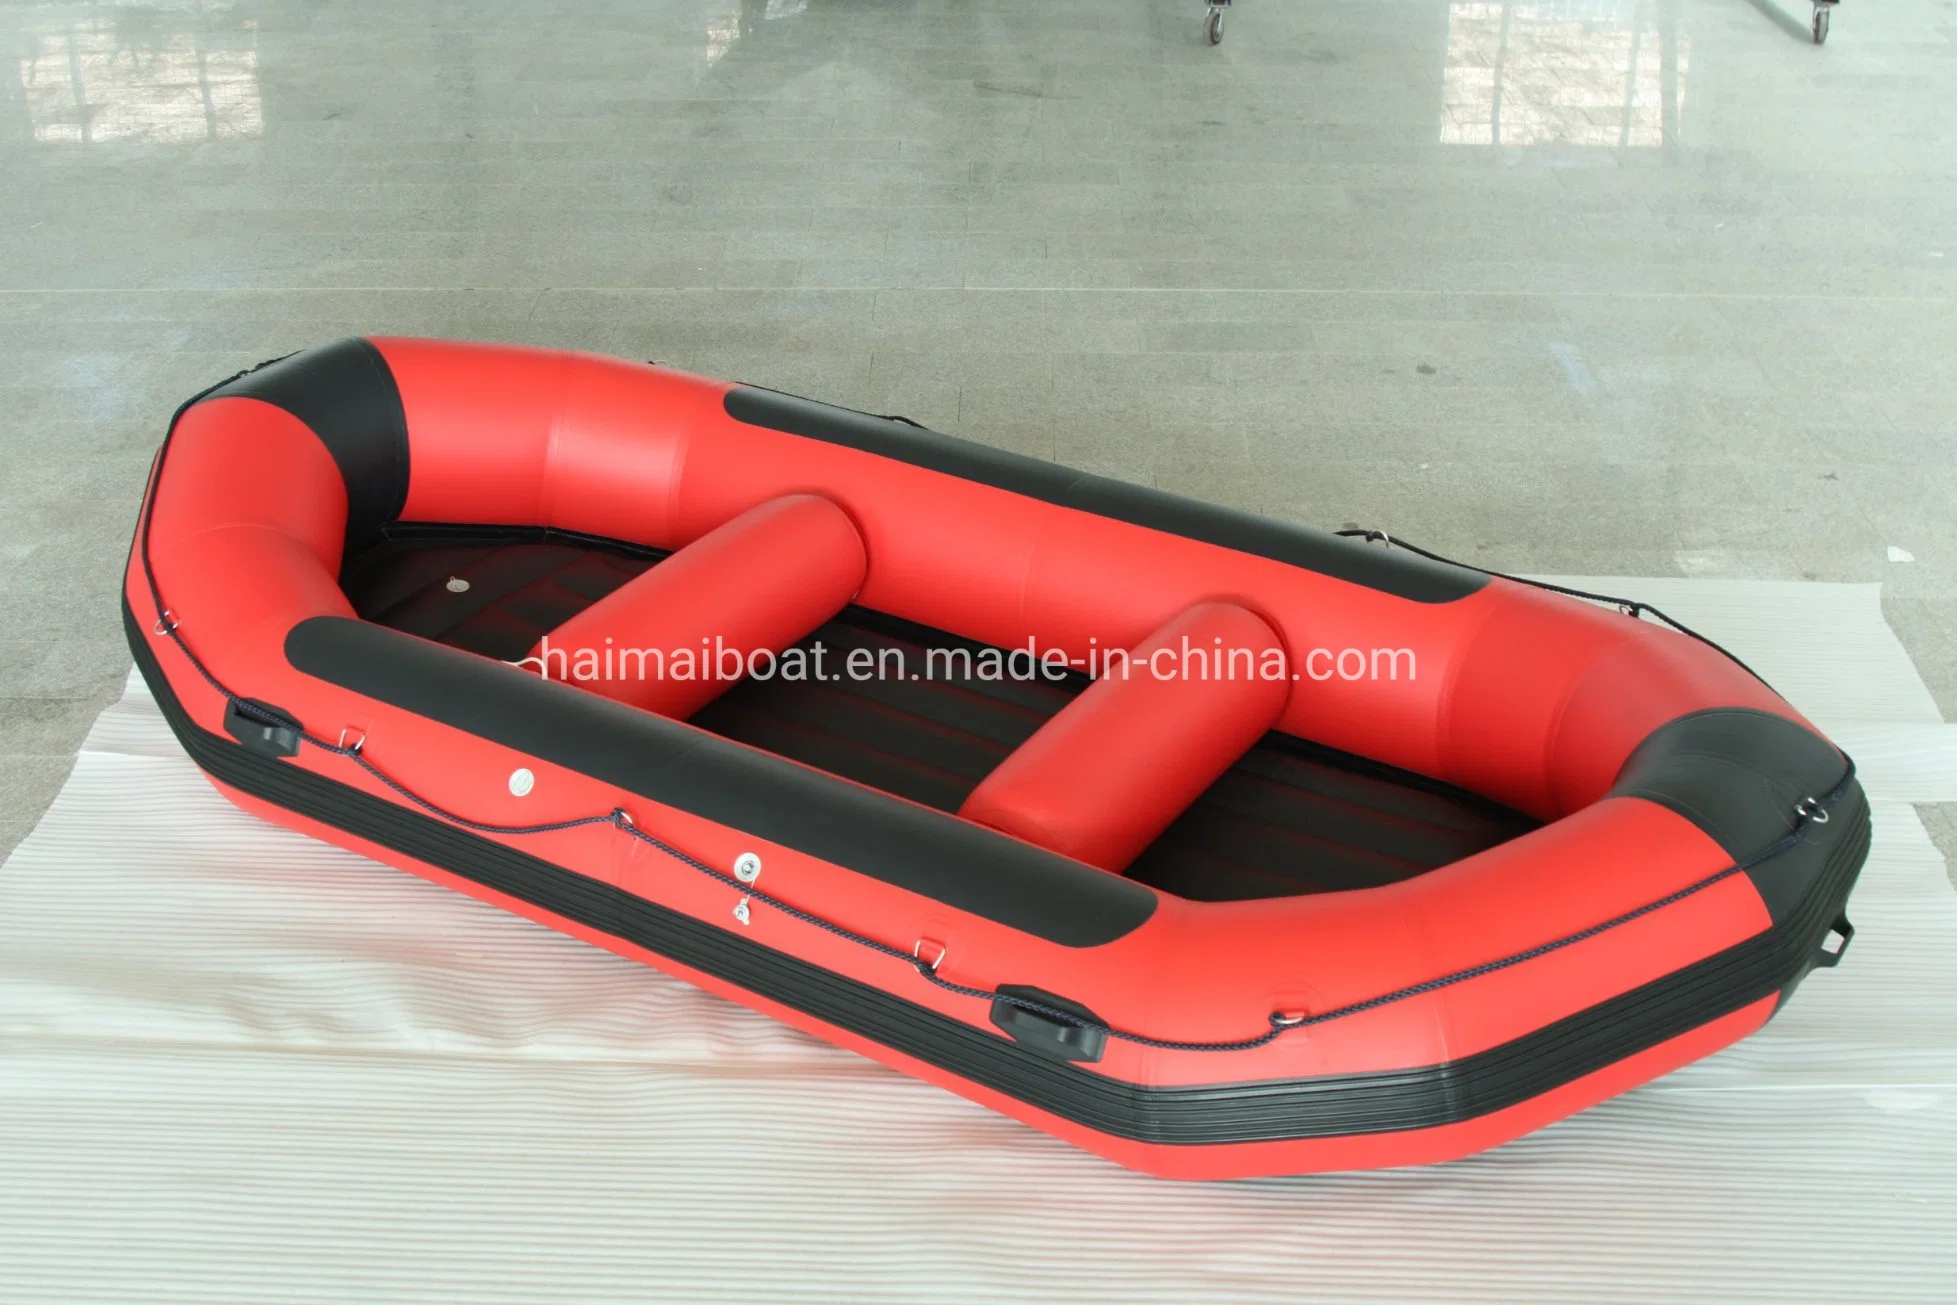 Hot Sale Item Water Sport Product 10 Persons 14feet 4.3m PVC Inflatable Floating Boat Rafting Boat PVC Boat Rapids Boat River Junior Boat Canoe Slalom for Sale